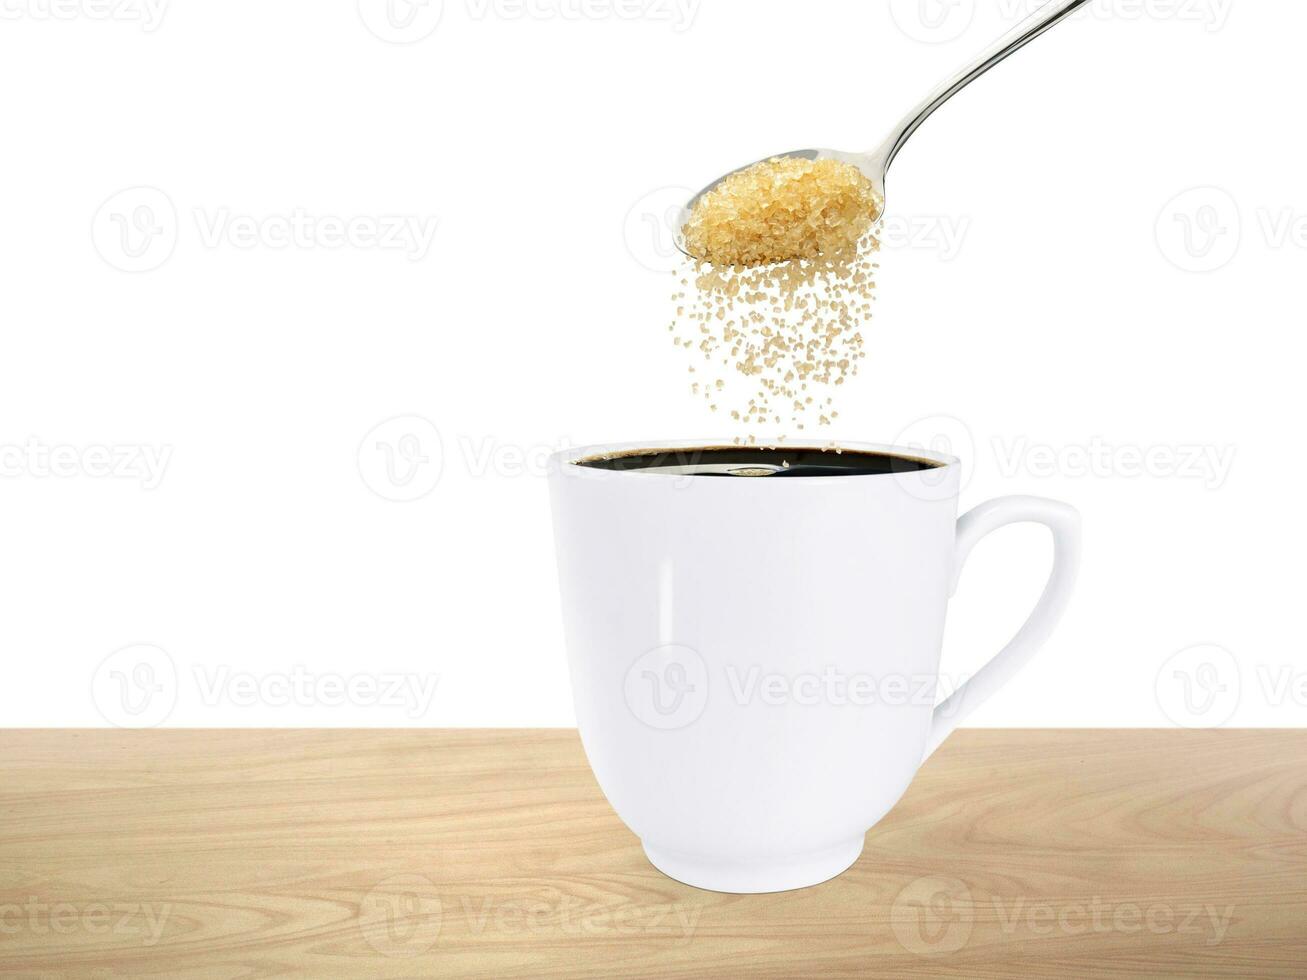 A spoonful of granulated sugar is poured into a white coffee mug placed on a wooden floor. photo